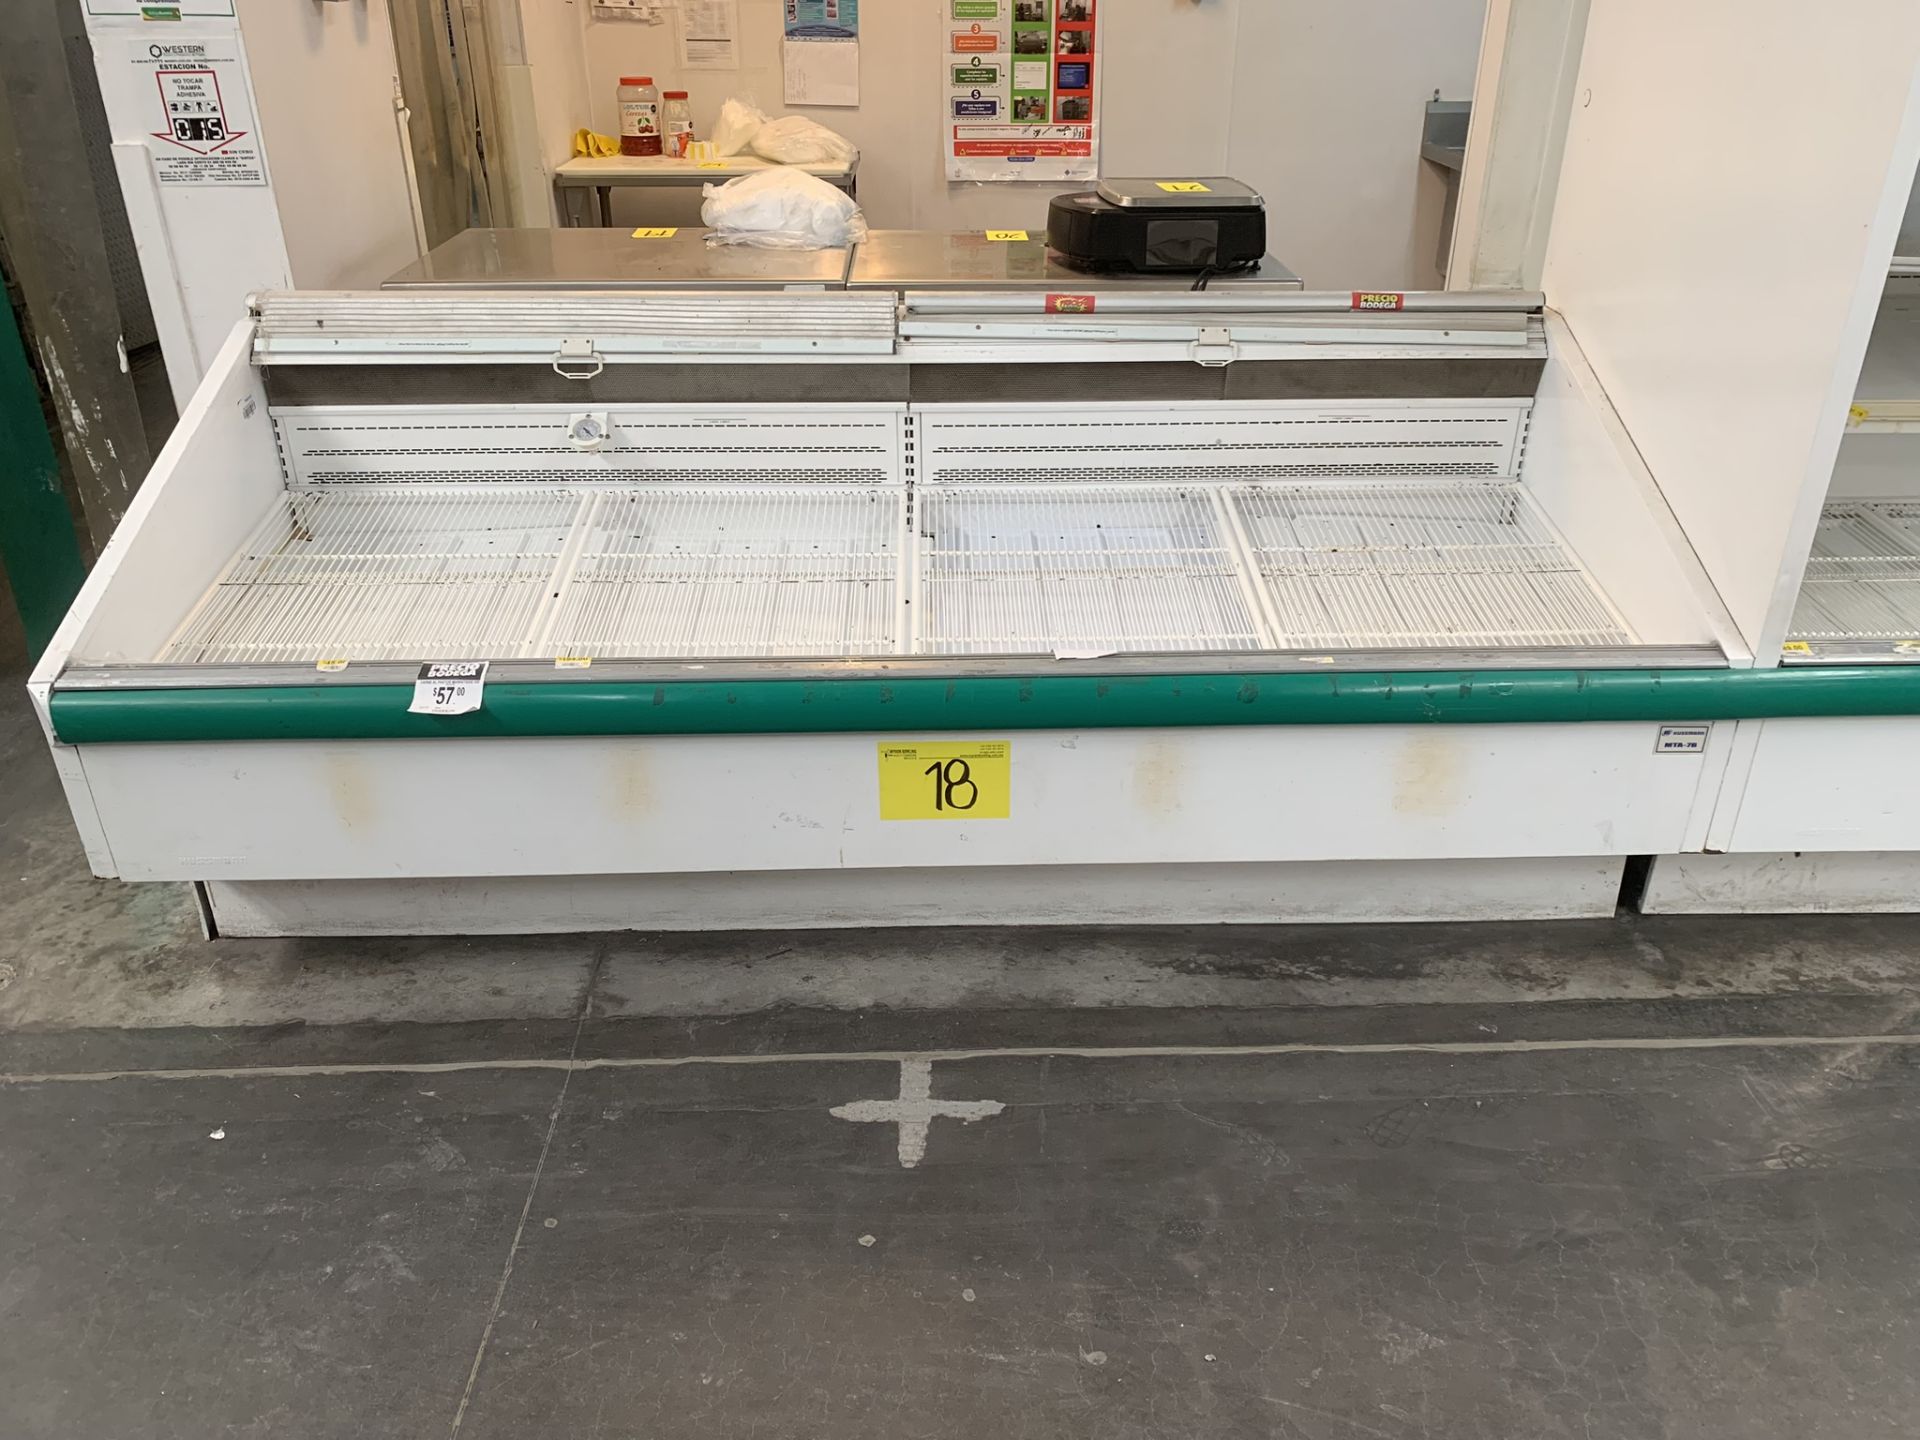 Hussmann bunker-type refrigerated display case for meats measures 2.55 x 1.10 x 0.90 mts